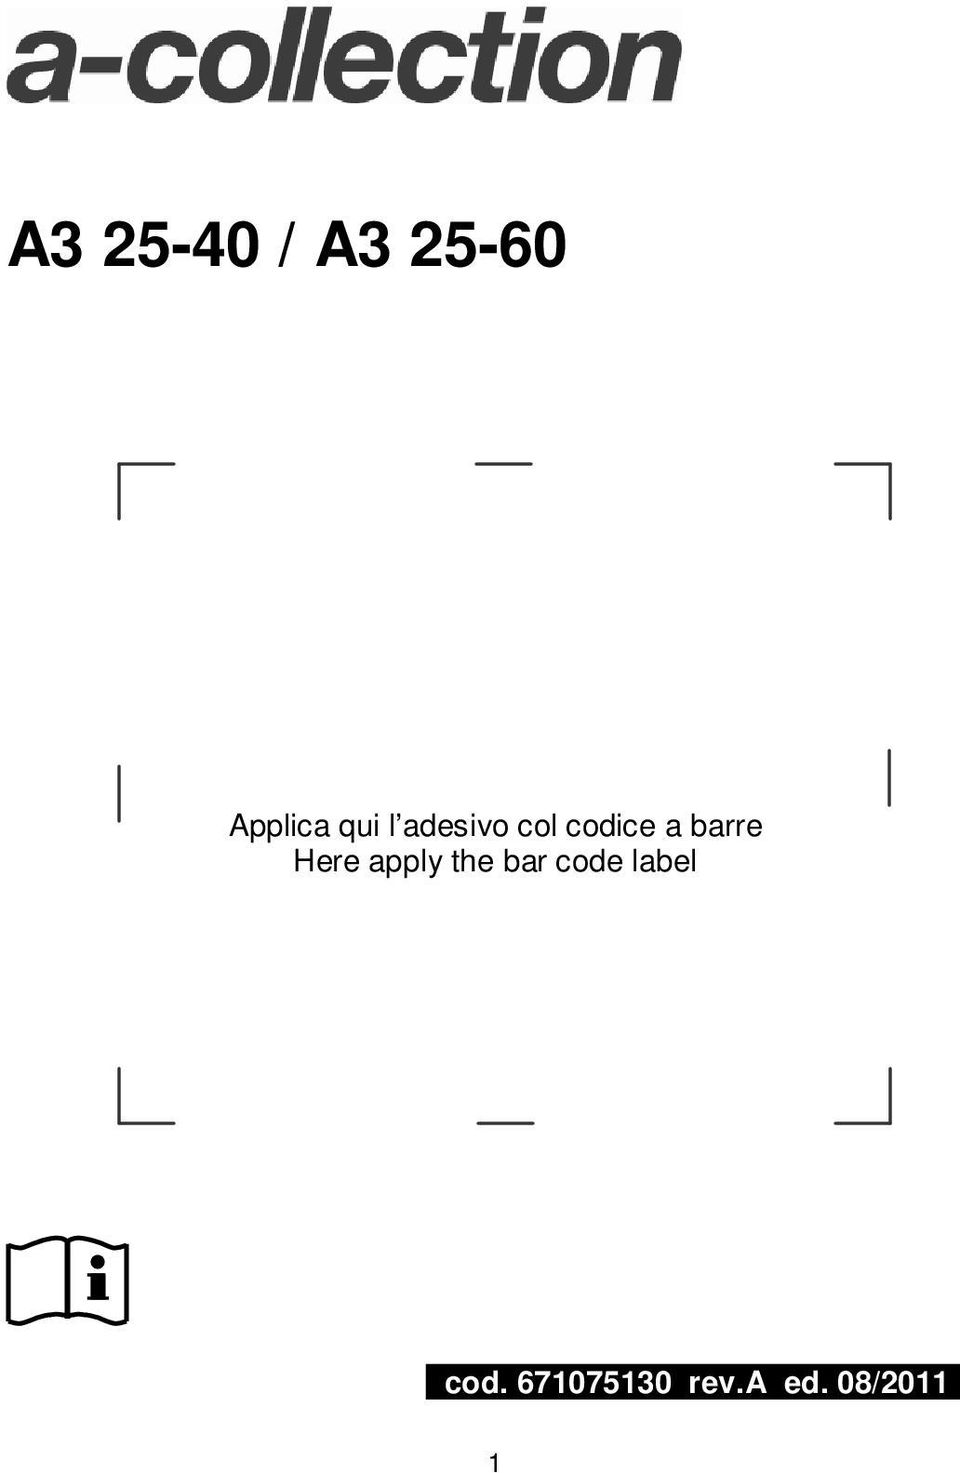 Here apply the bar code label -